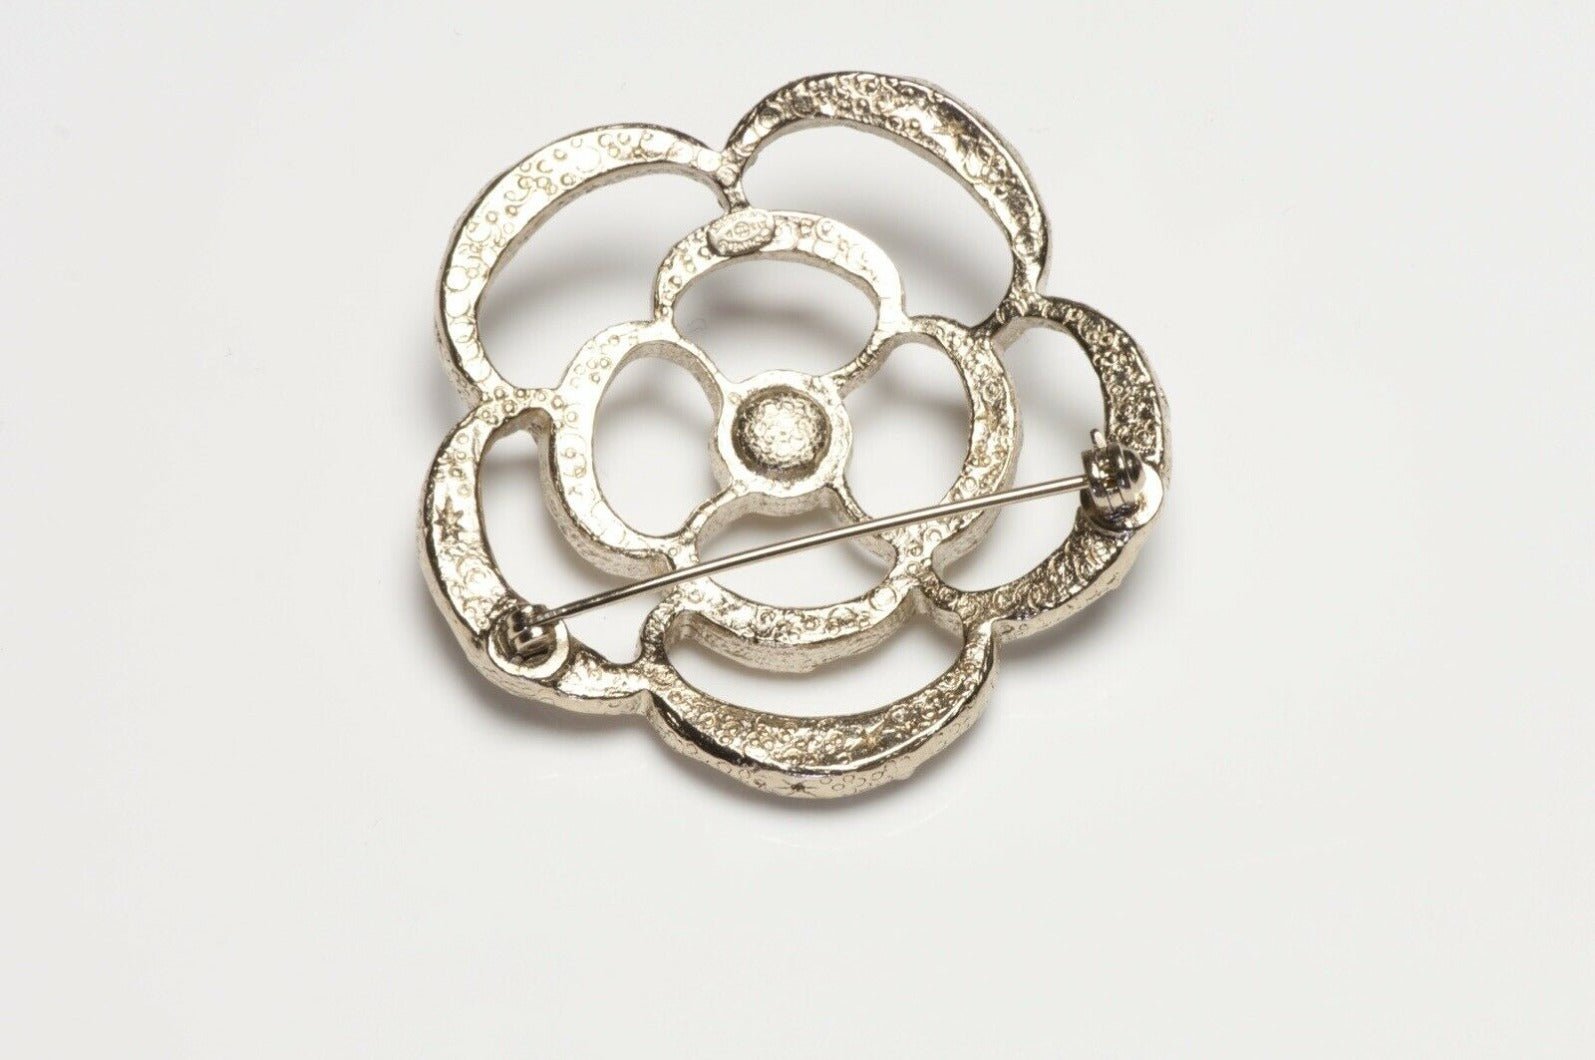 CHANEL Paris Spring 2013 Faux Pearl Camellia Flower Brooch